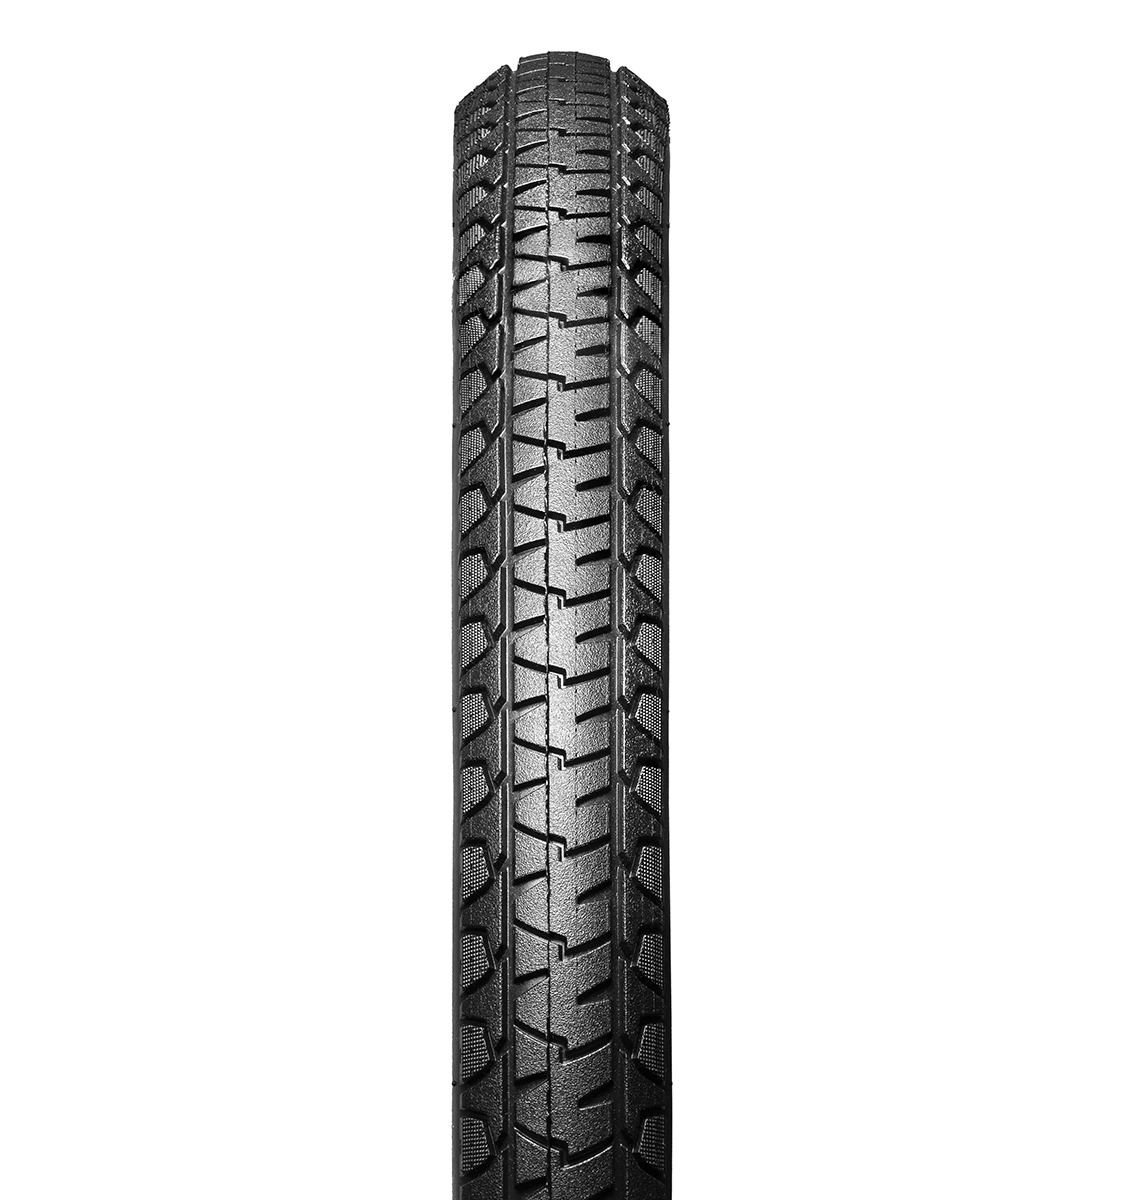 Hutchinson's Republic Tyre for Superior Performance and Durability